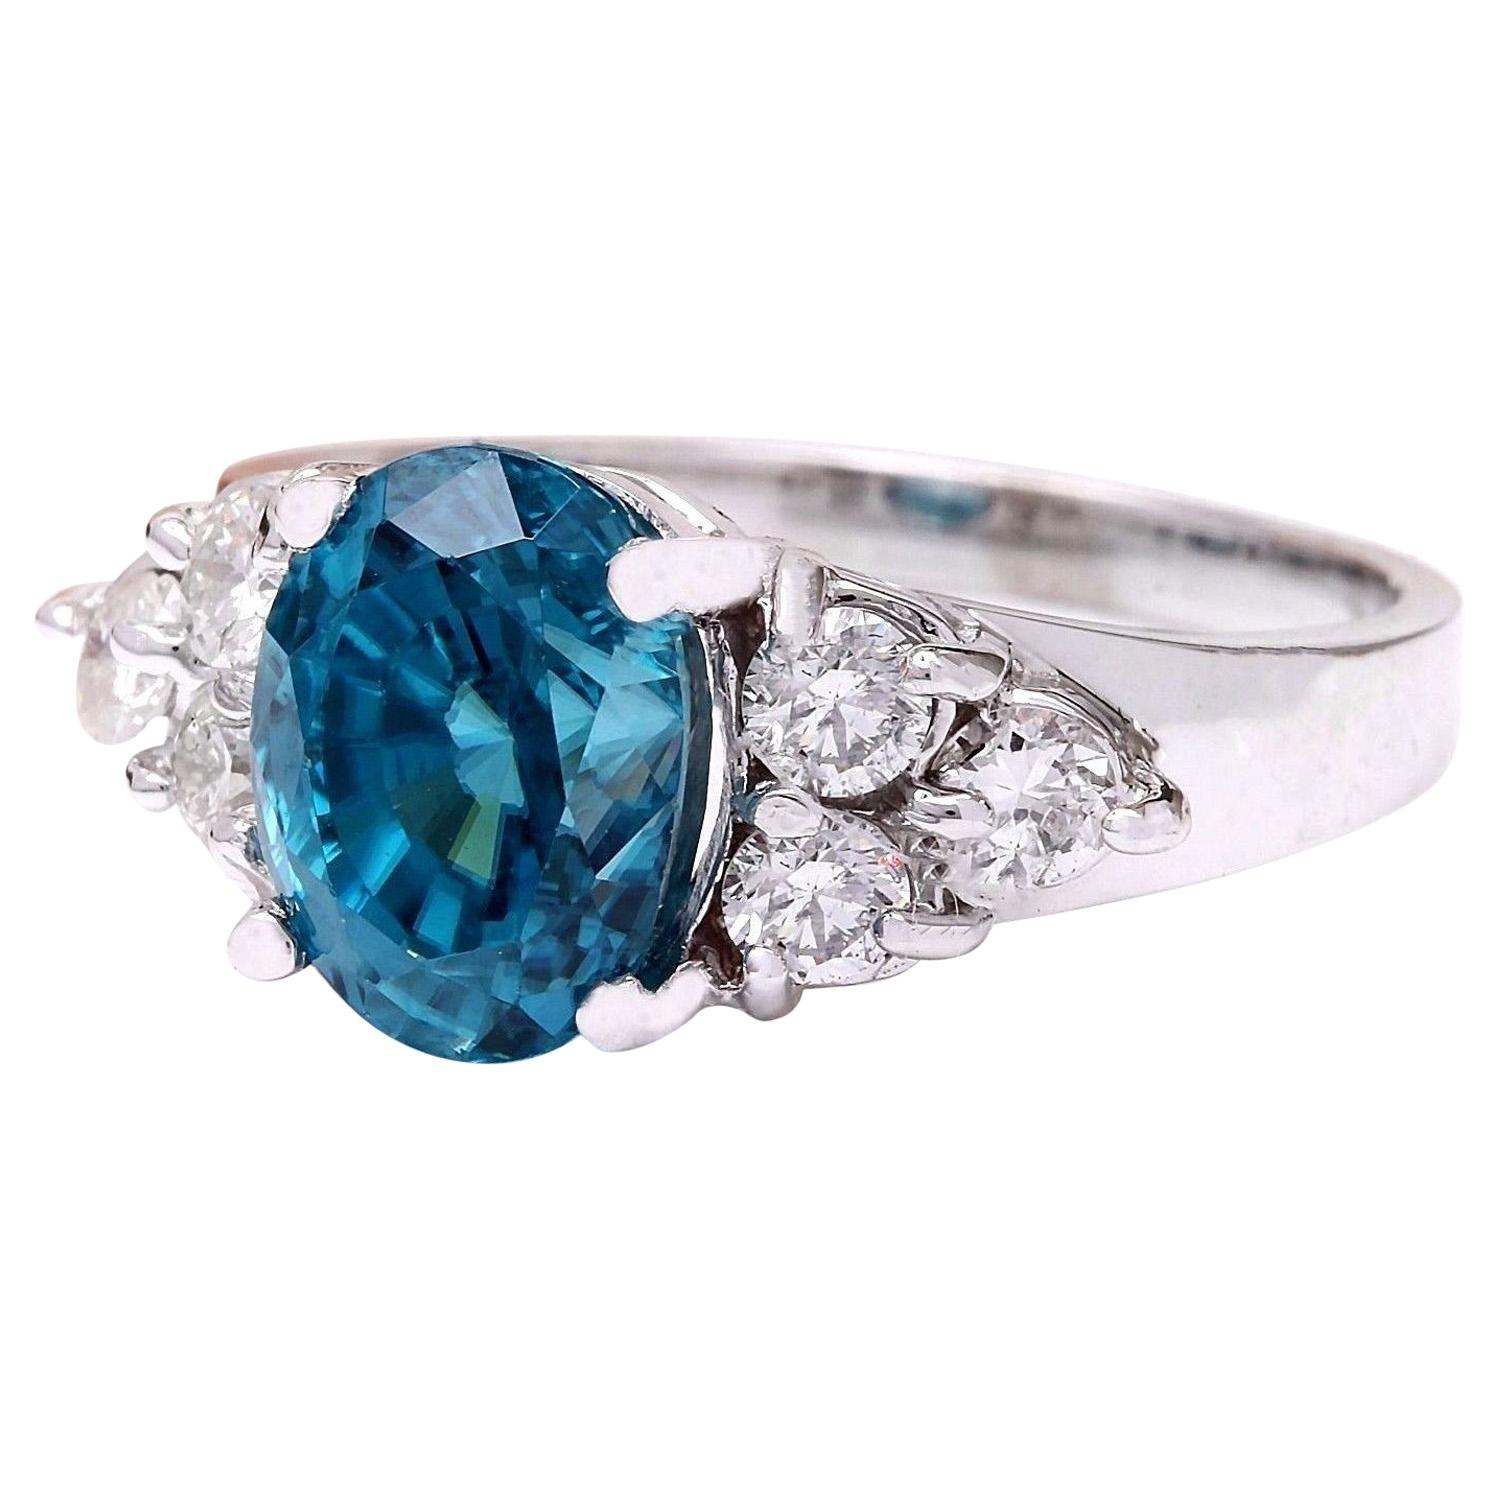 6.40 Carat Natural Zircon 14K Solid White Gold Diamond Ring
 Item Type: Ring
 Item Style: Engagement
 Material: 14K White Gold
 Mainstone: Zircon
 Stone Color: Blue
 Stone Weight: 5.80 Carat
 Stone Shape: Oval
 Stone Quantity: 1
 Stone Dimensions: